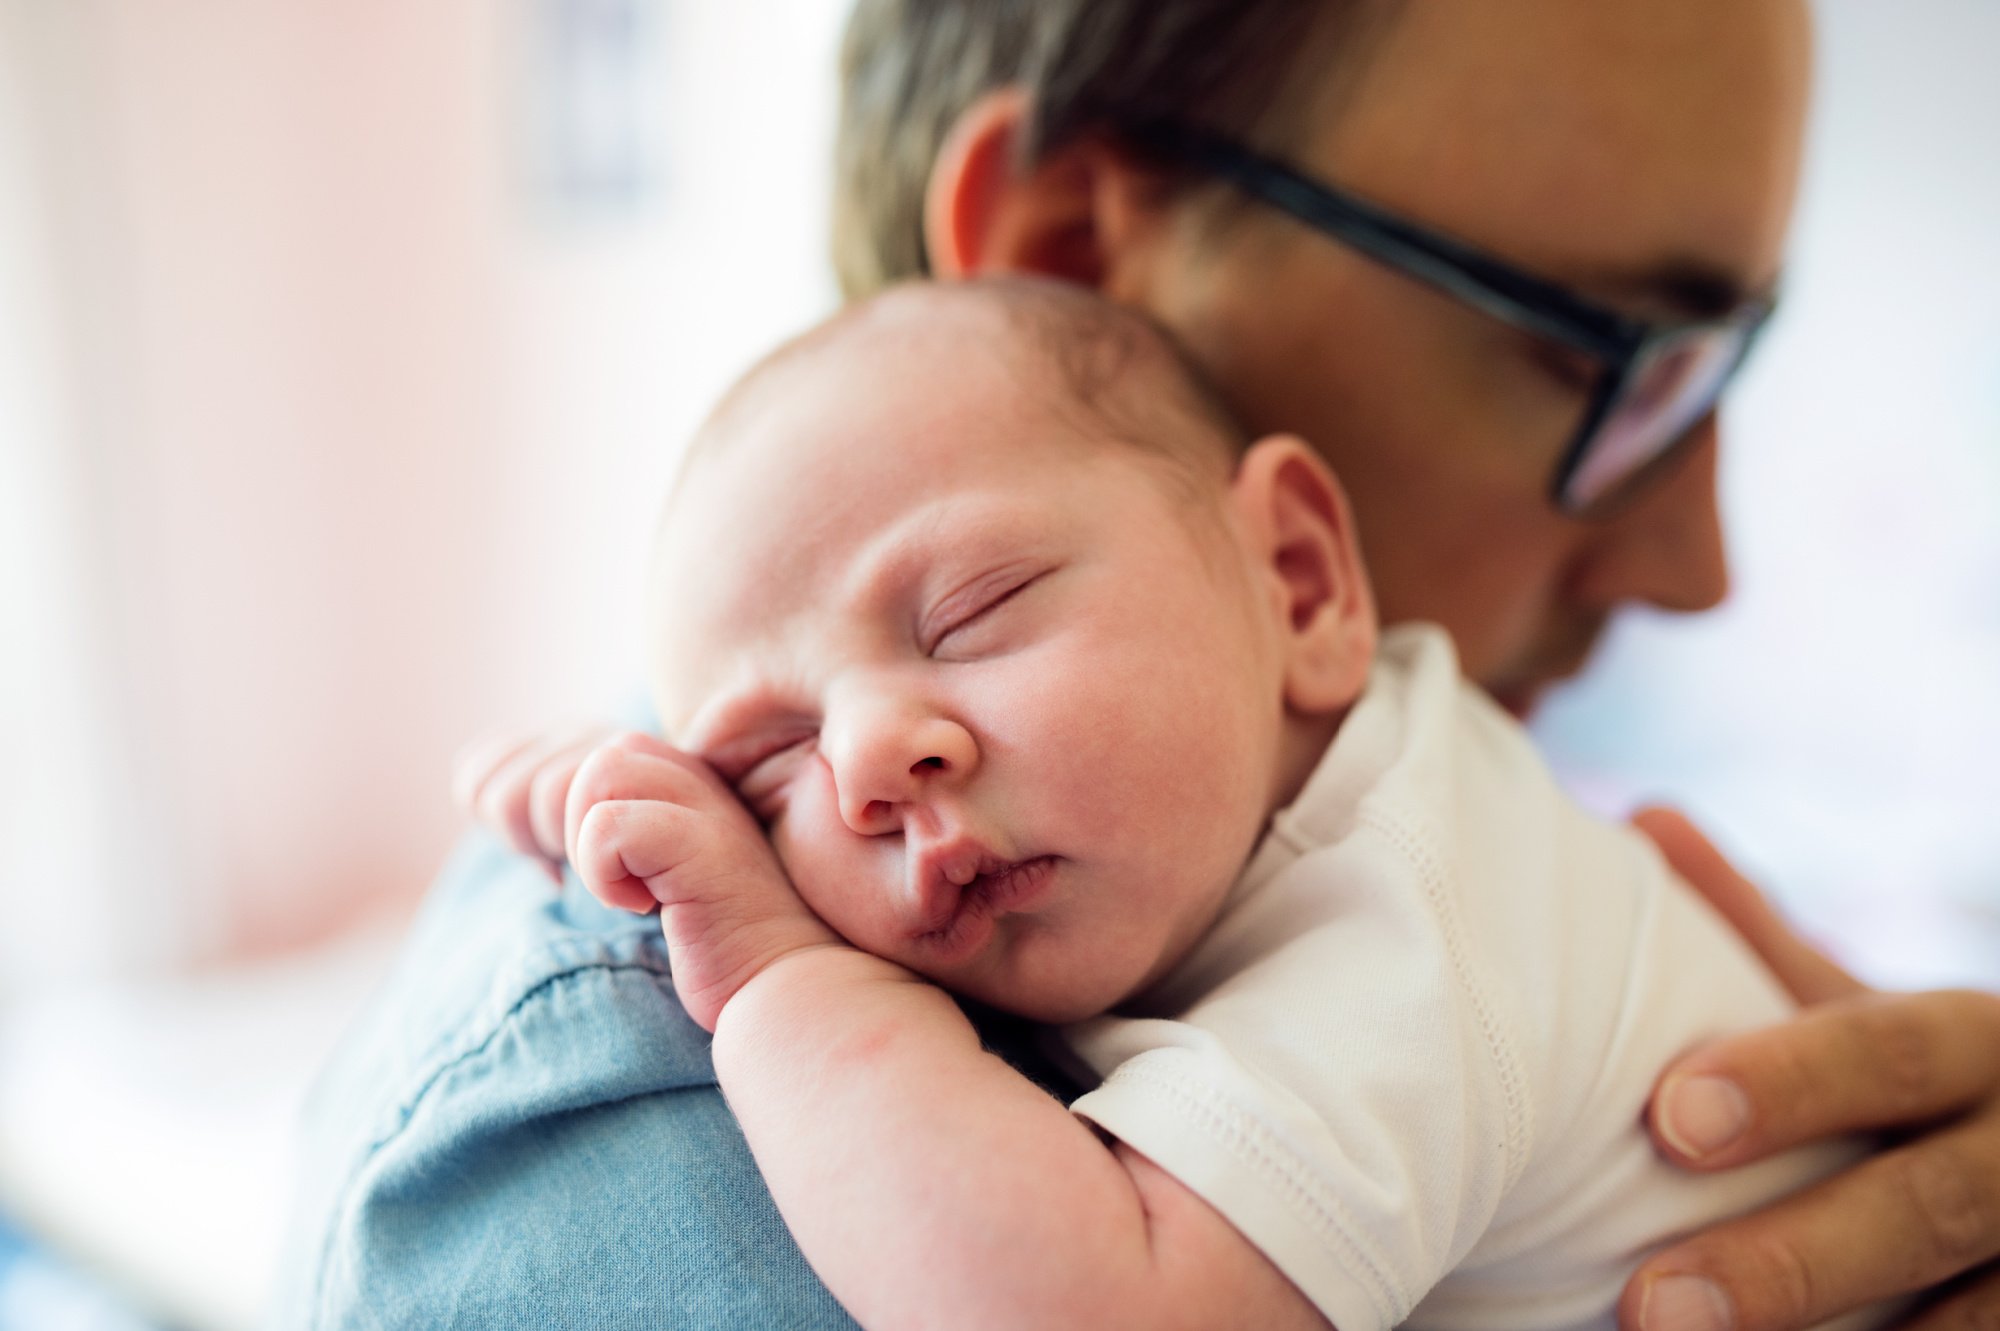 Baby sleeping wearing white being held by Dad wearing blue shirt and glasses_PBB.jpg